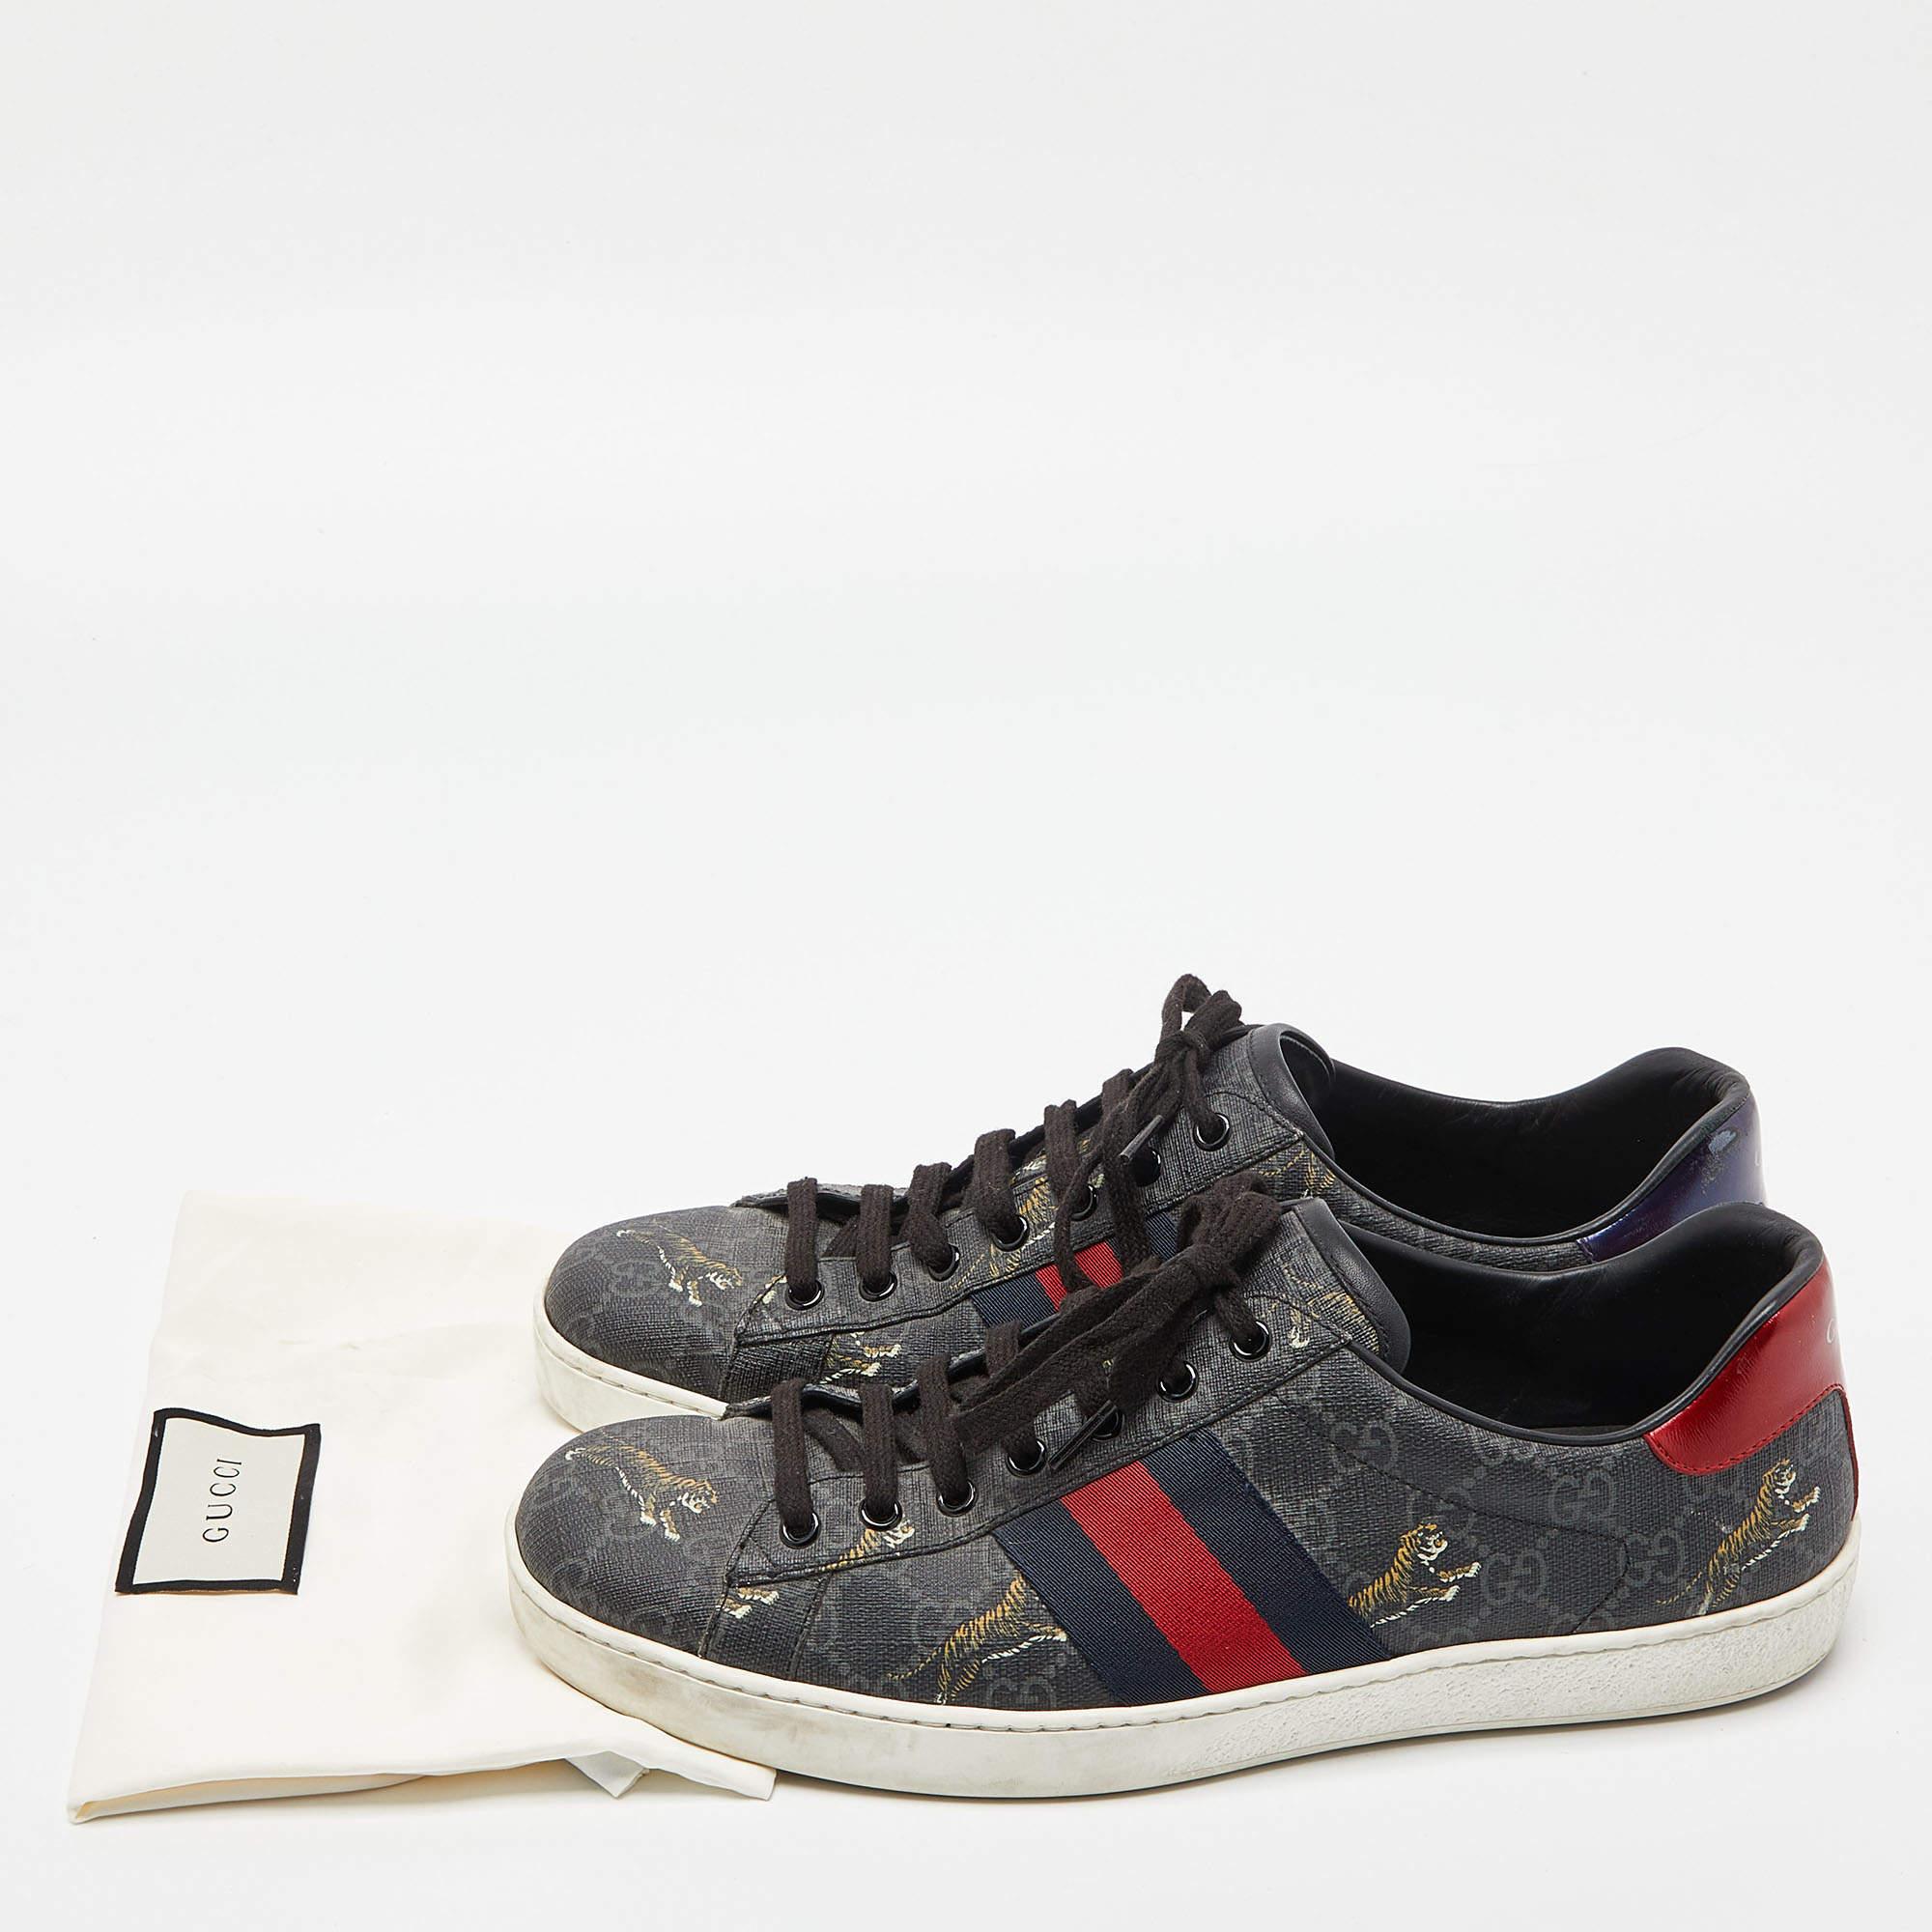 Gucci Black GG Supreme Canvas Web Ace Tiger Low Top Sneakers Size 43 For Sale 3